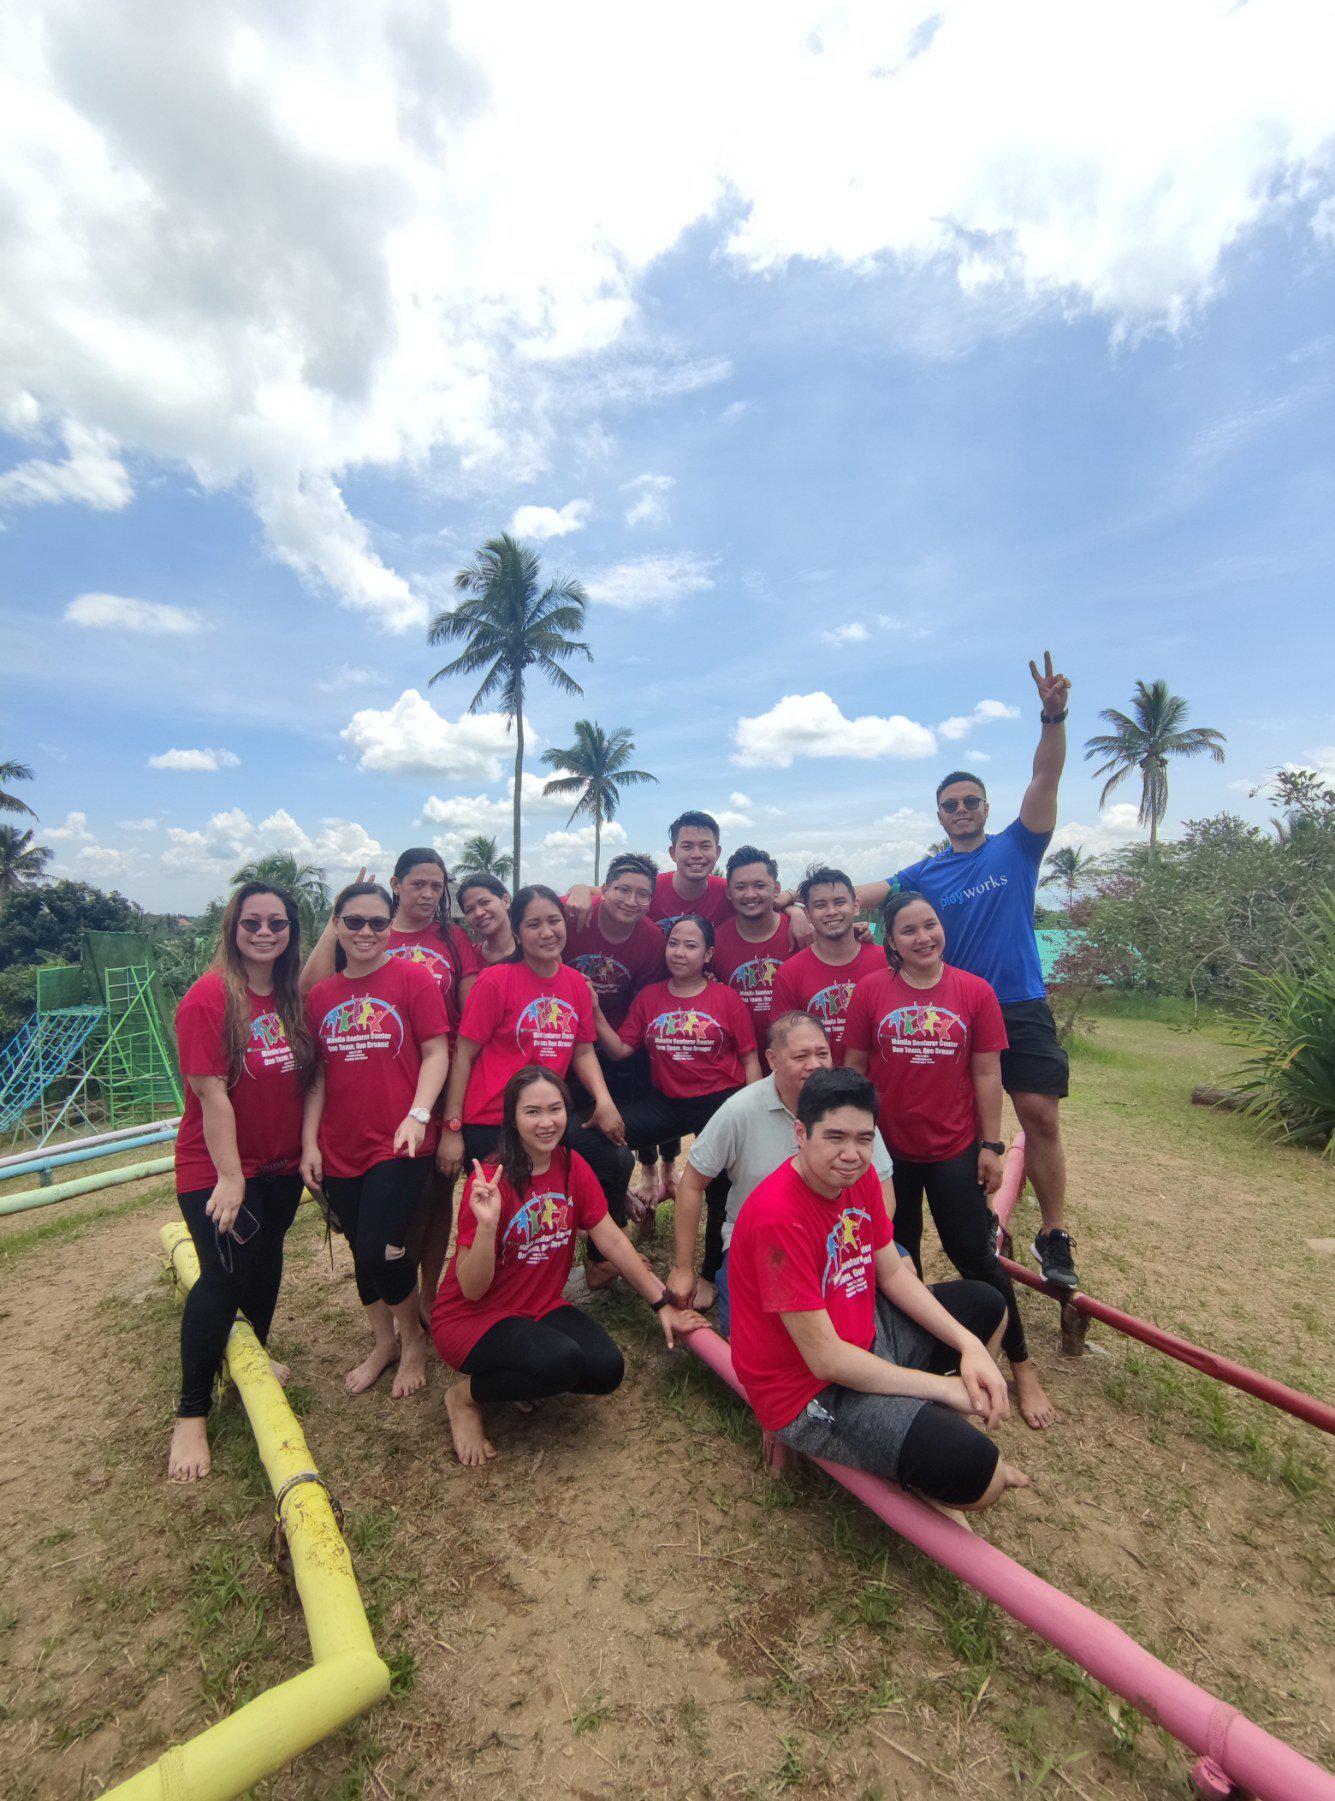 Team VGroup just completed their Team Building at Gratchi's Getaway x Playfarm - Team Building, Corporate & Educational Events Center!  Congratulations!